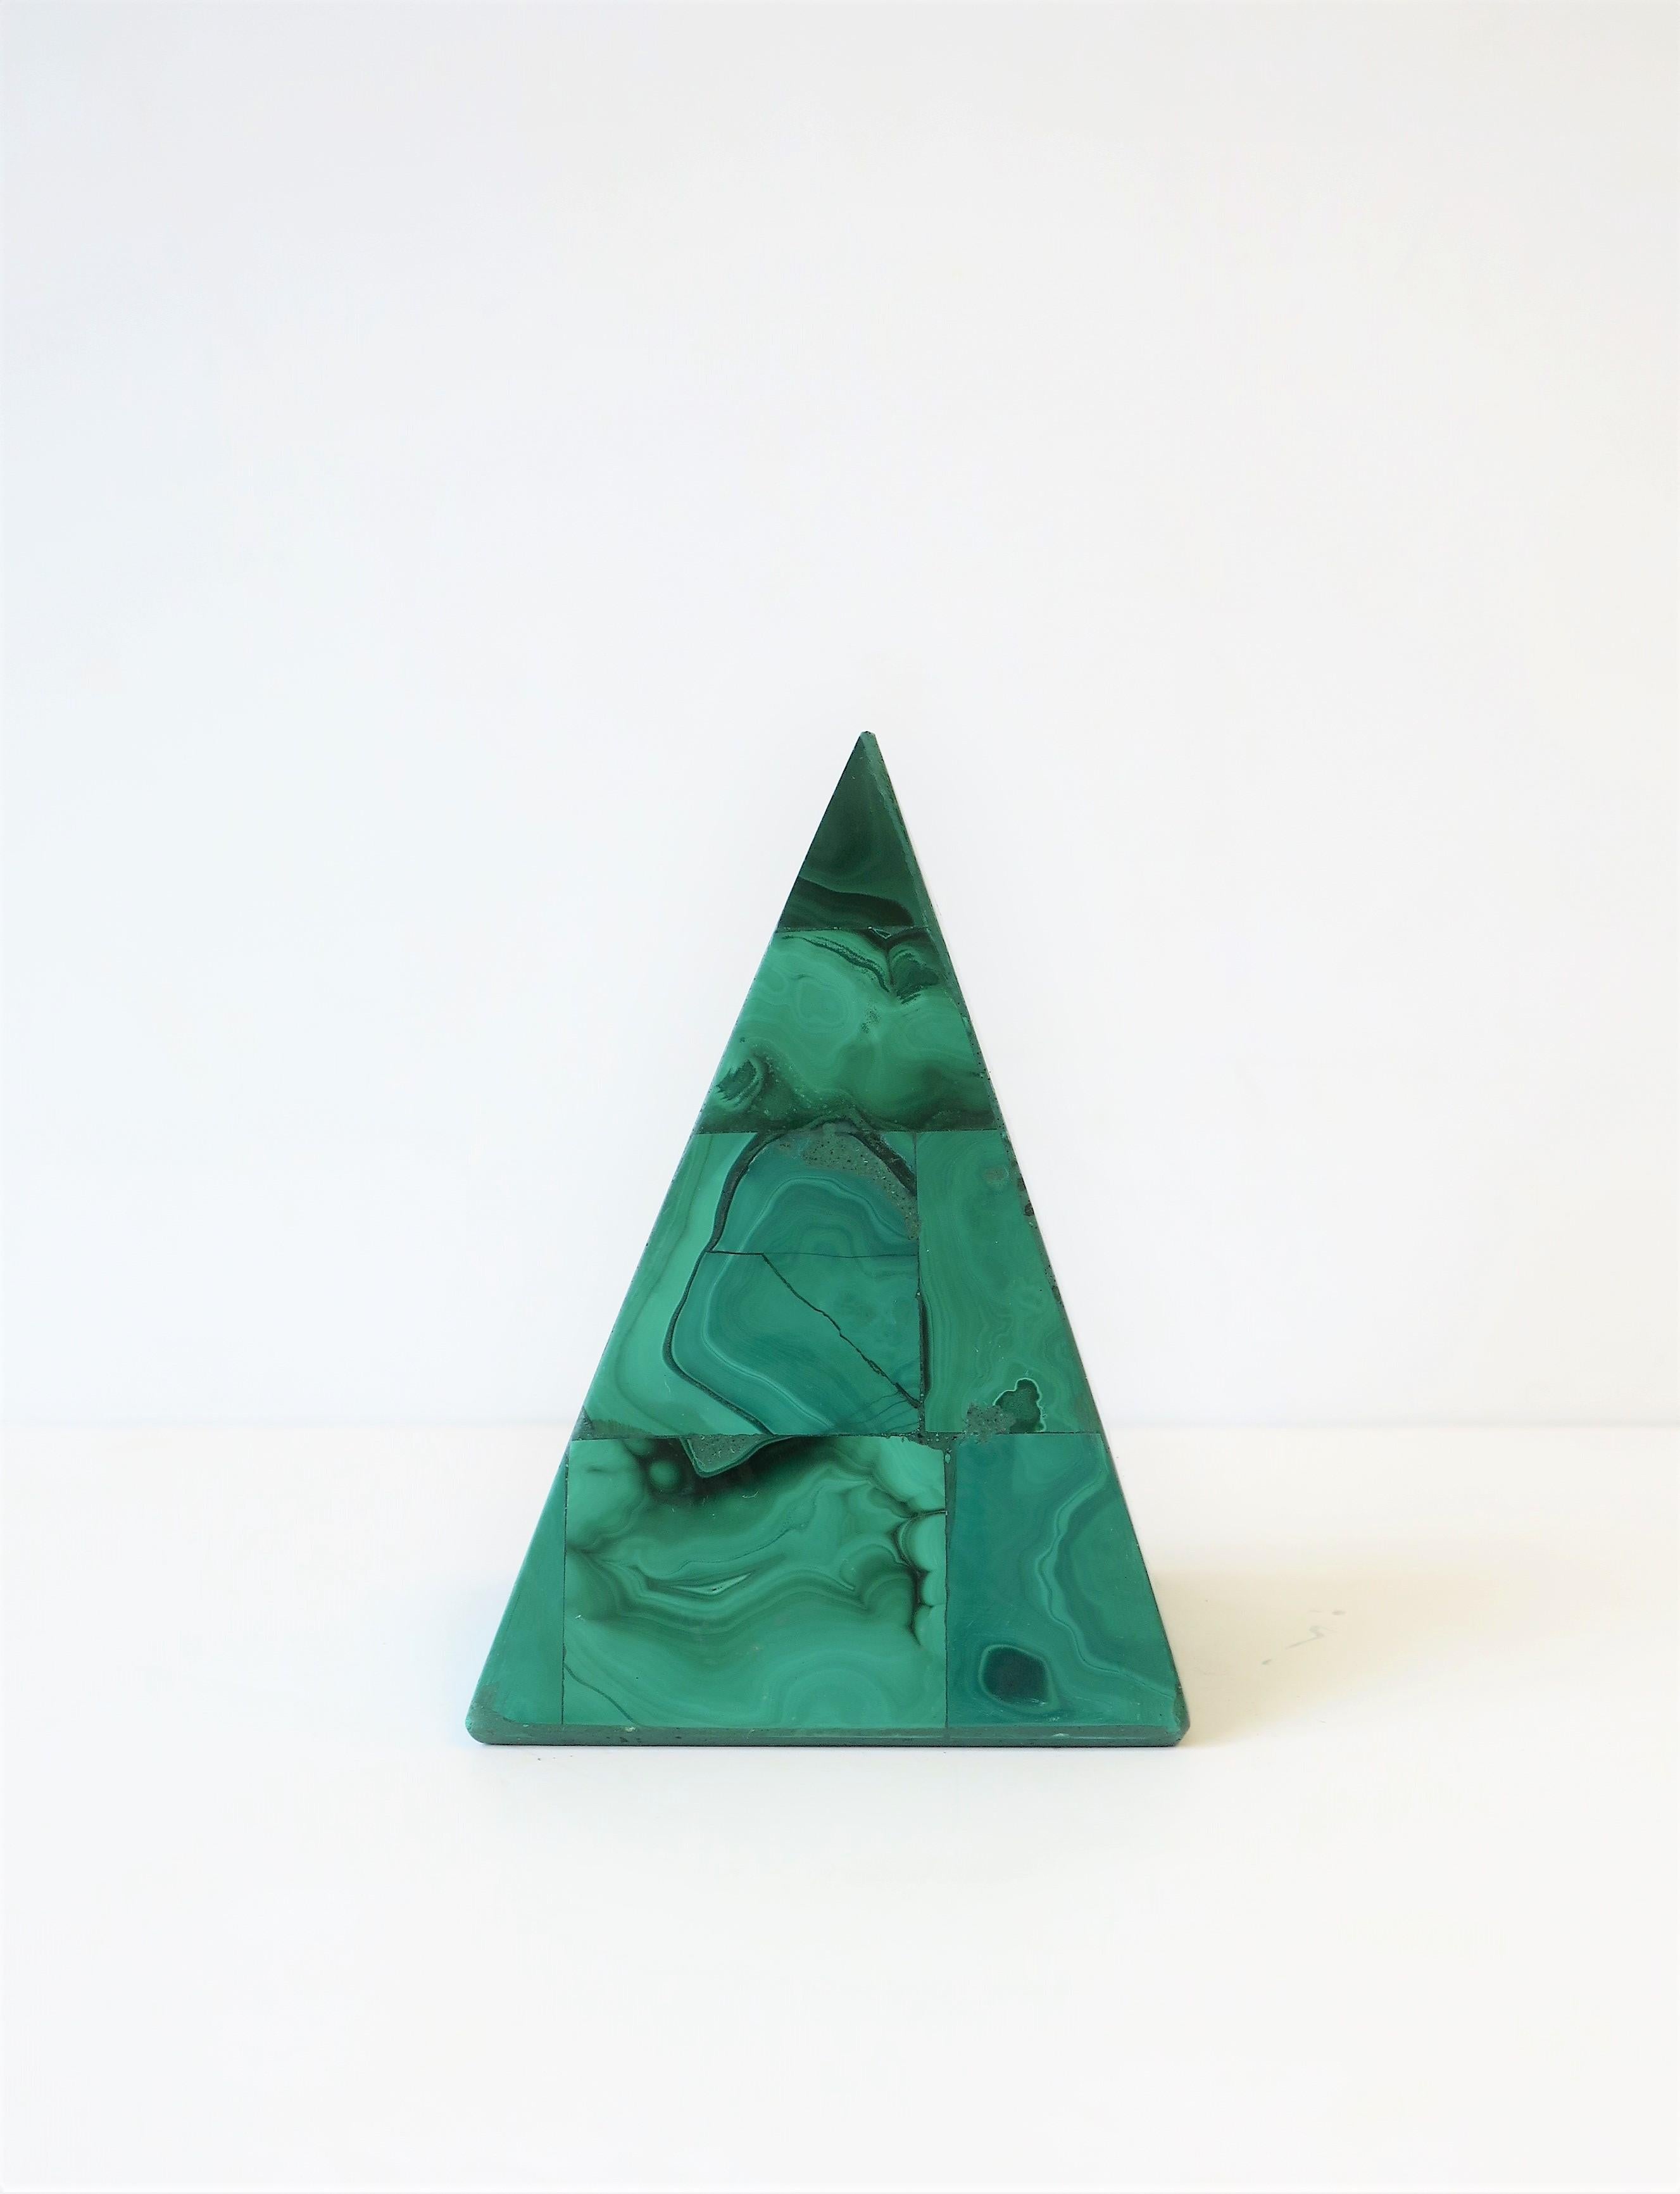 A very beautiful and striking green malachite stone pyramid decorative object. Pyramid is green malachite with a 'tiled' or 'tessellated' polished malachite veneer. Piece measures: 3.25